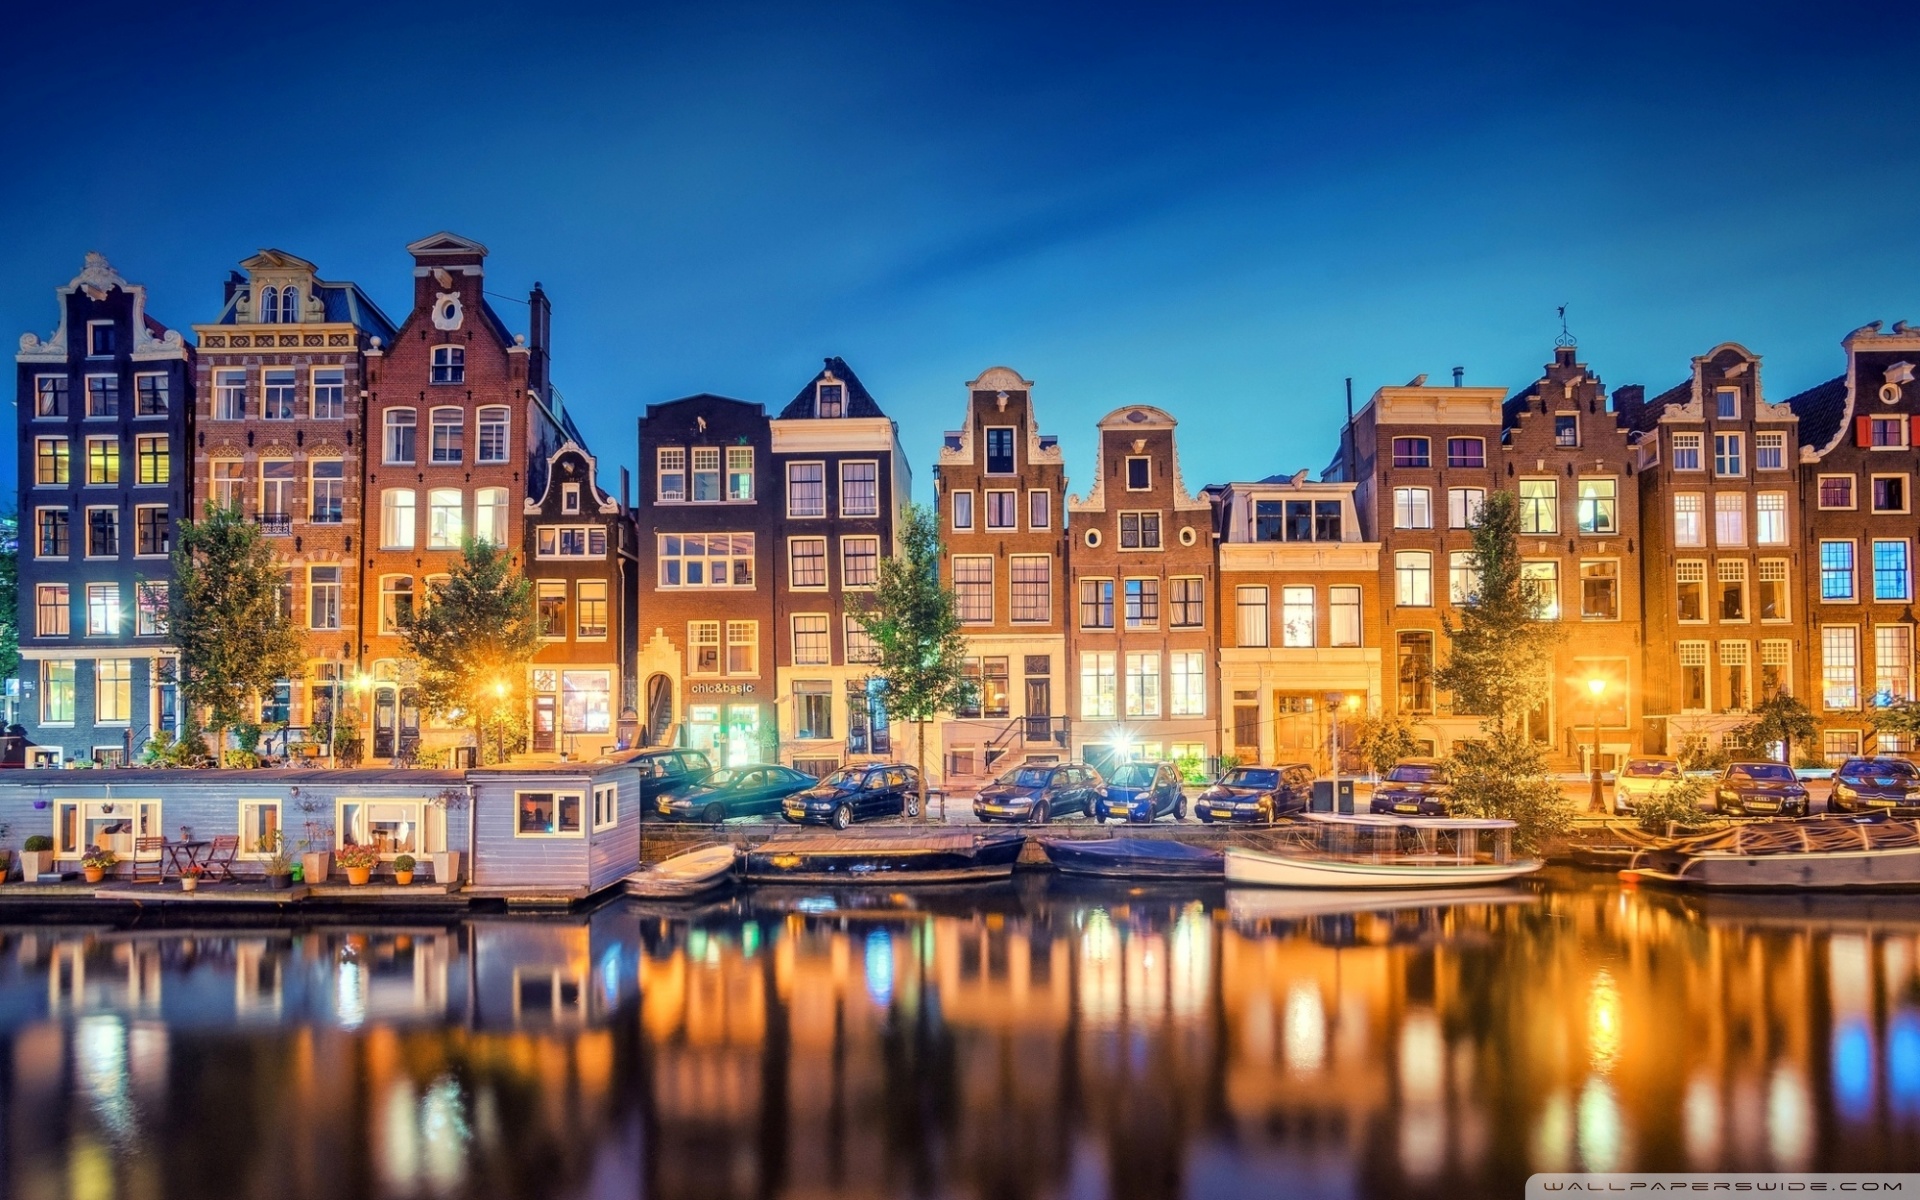 Amsterdam Bridge Building And Canal Netherlands 4K HD Travel Wallpapers   HD Wallpapers  ID 55860